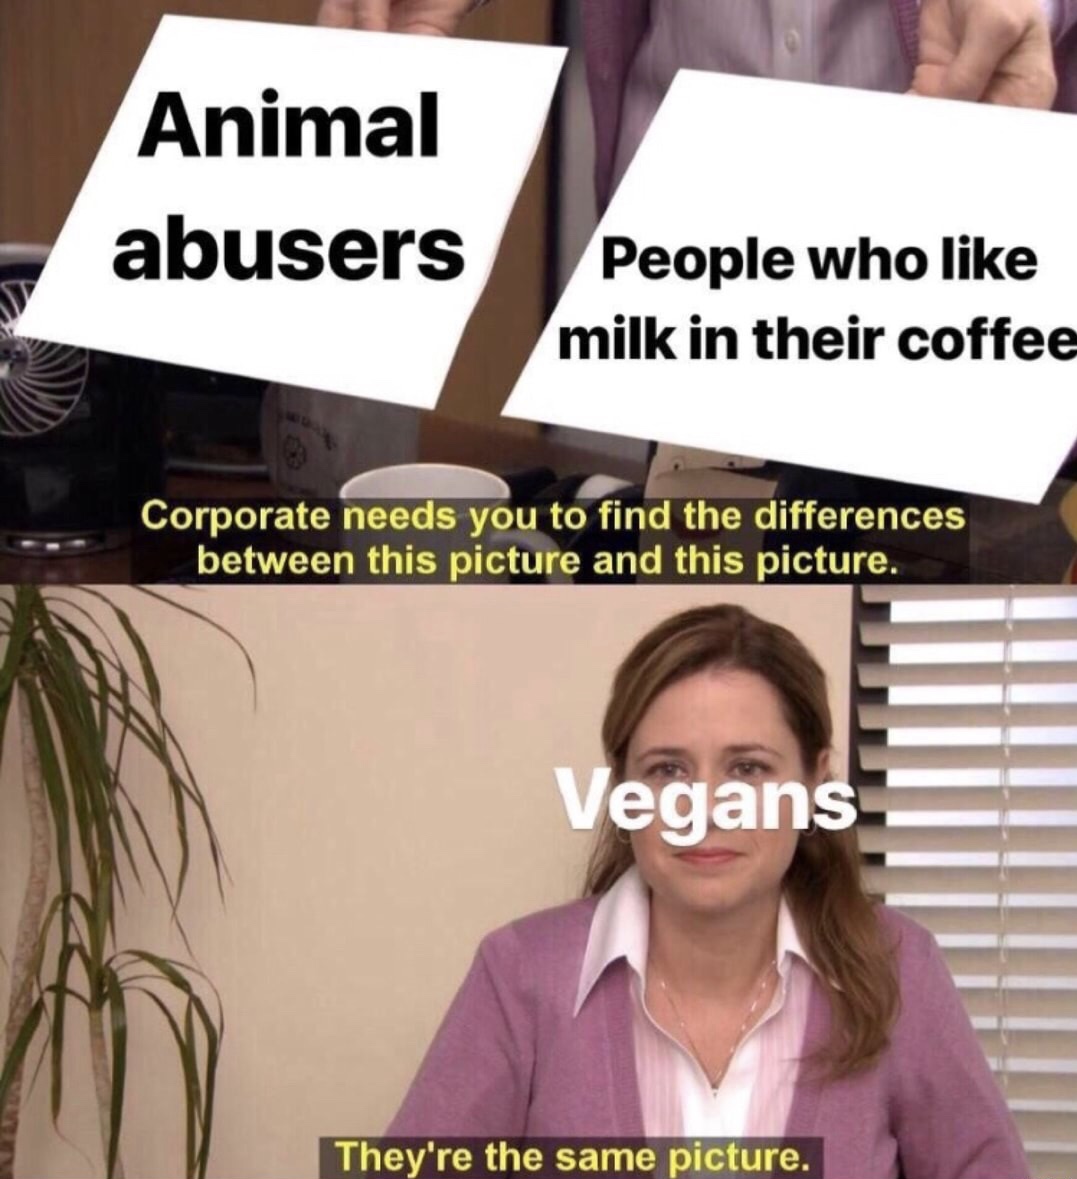 meme no nut november challenge - Animal abusers People who milk in their coffee Corporate needs you to find the differences between this picture and this picture. Vegans They're the same picture.